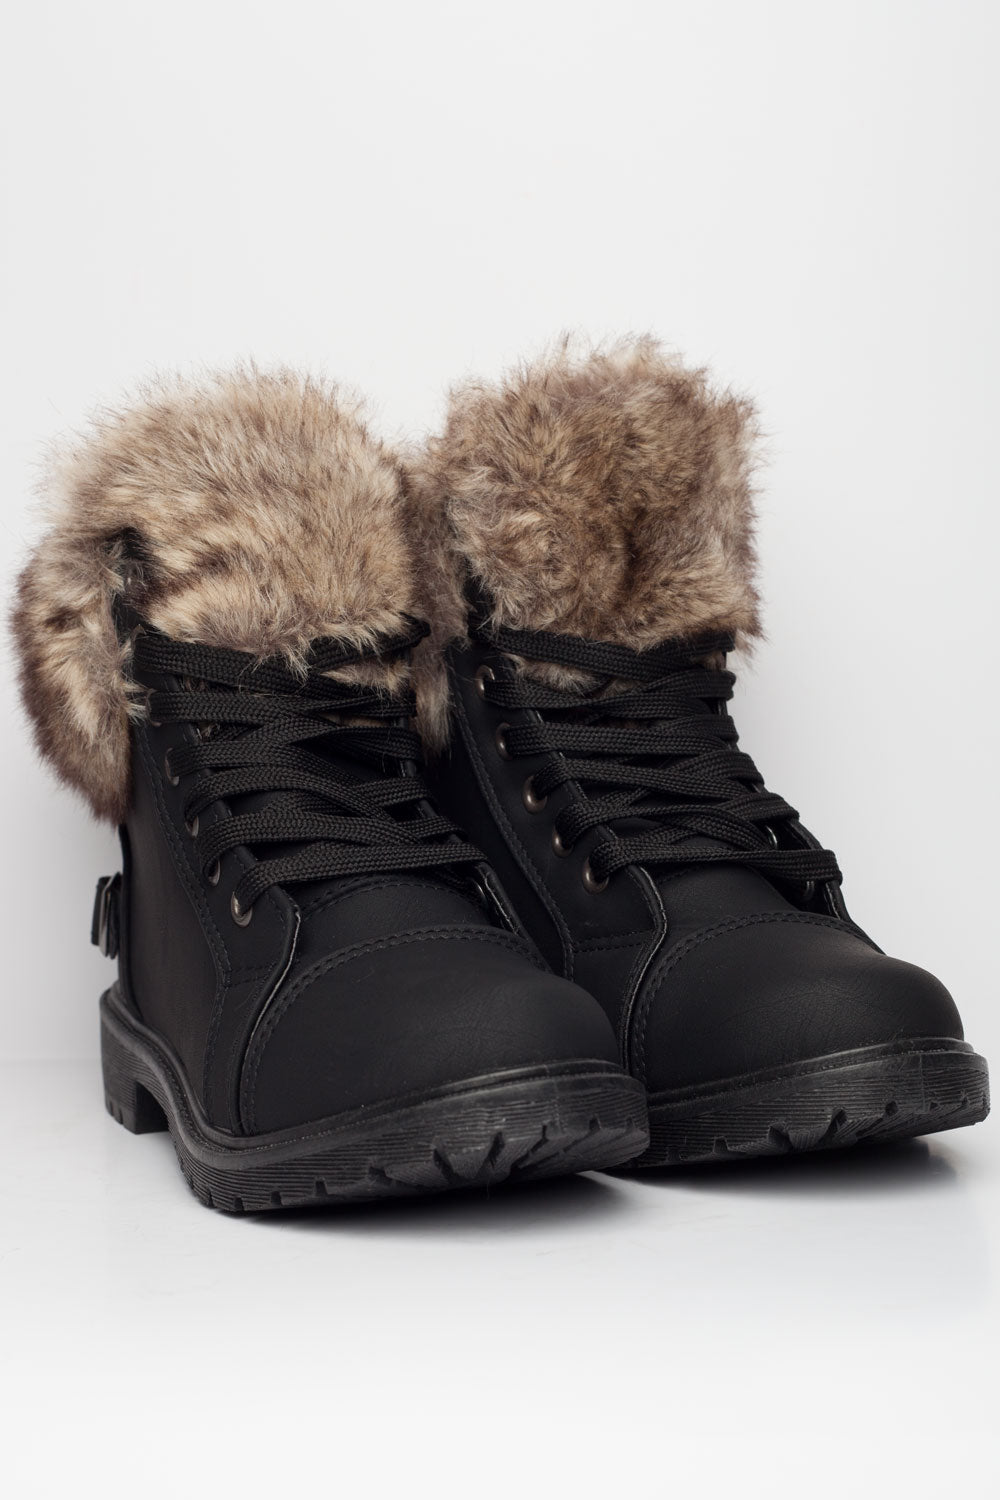 womens black fur lined boots